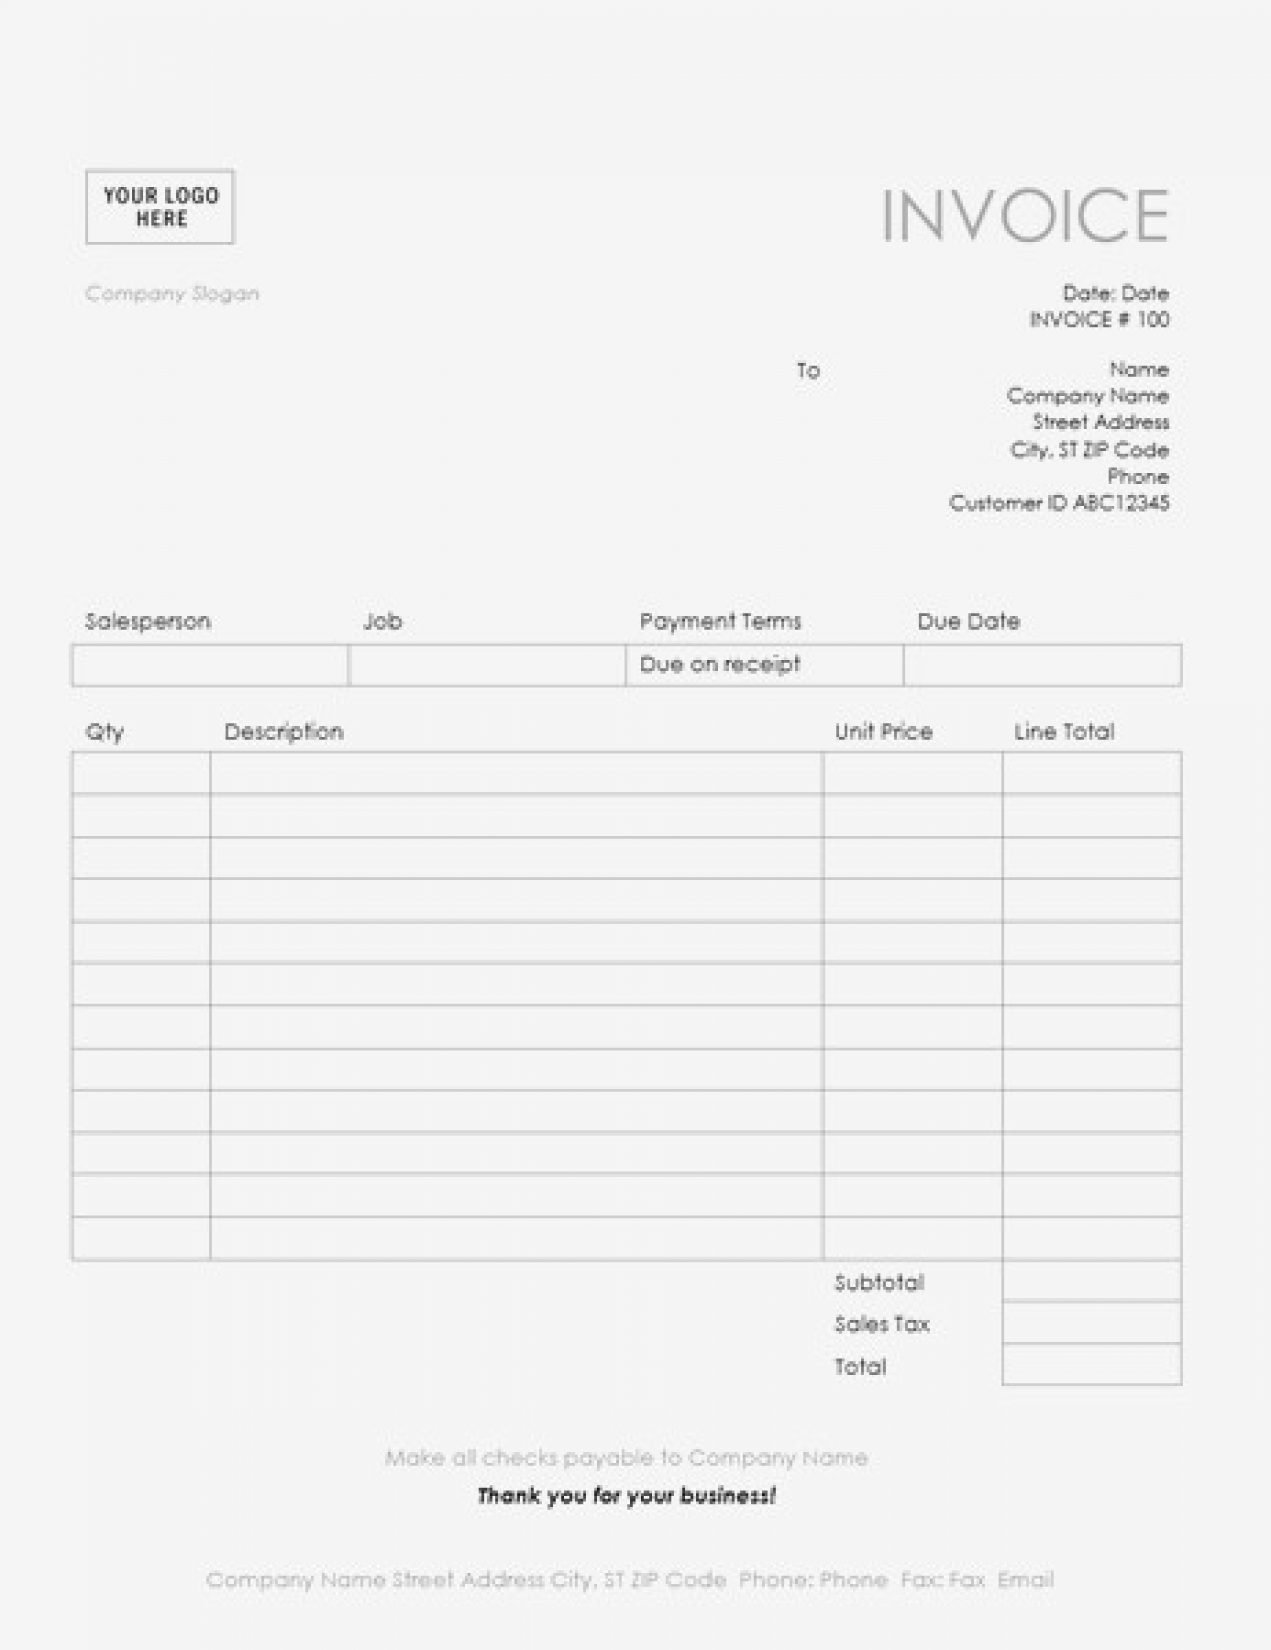 Microsoft Word Invoice Template Invoices Office Regarding Templates In